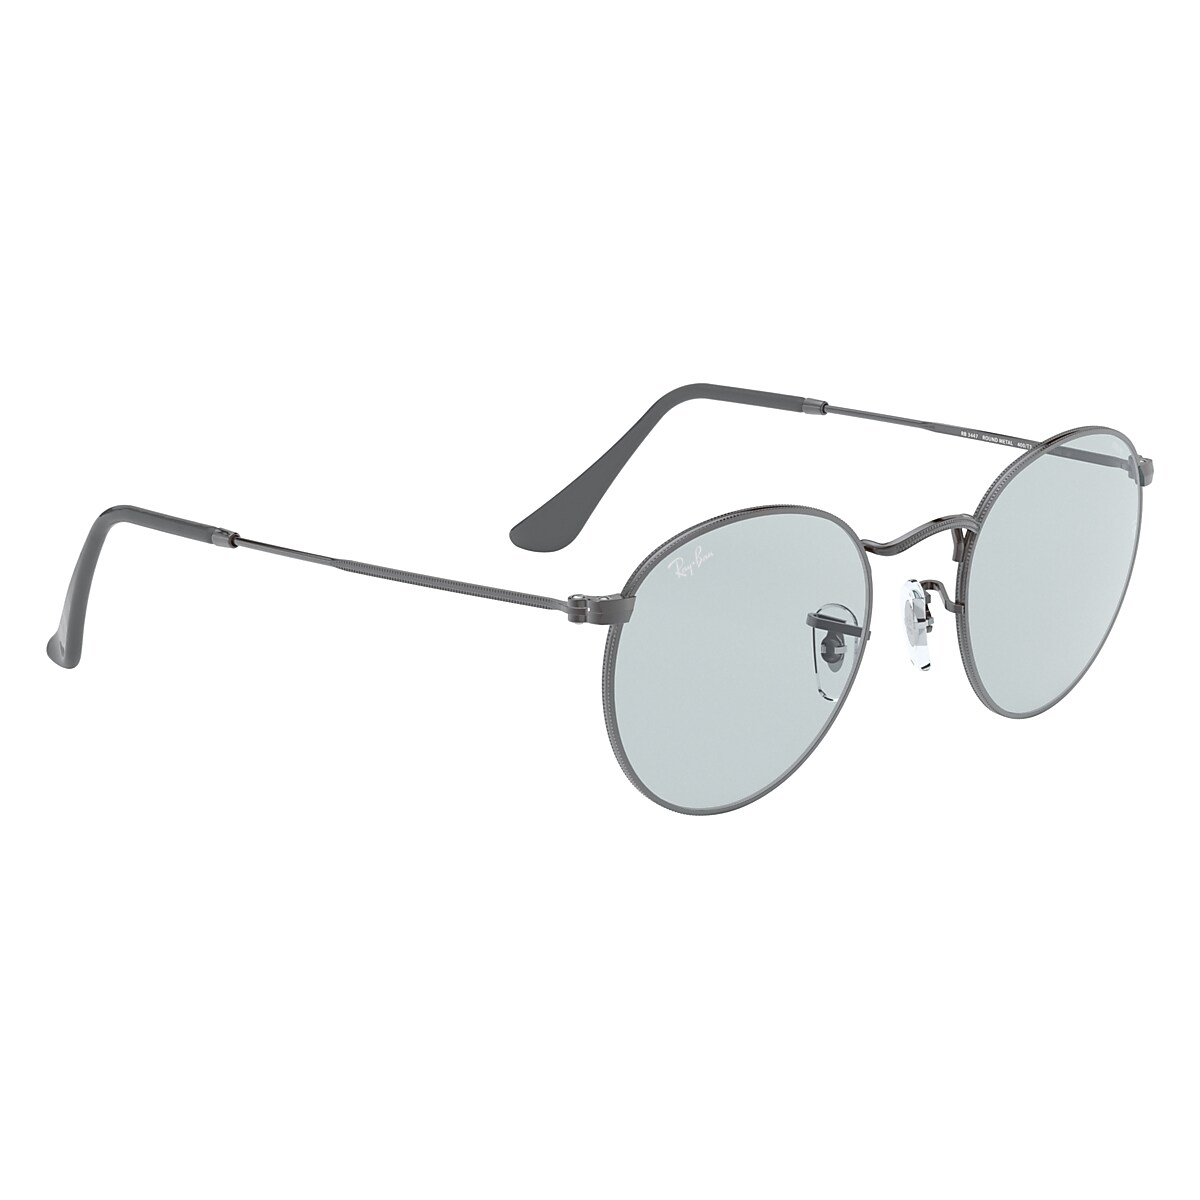 ROUND SOLID EVOLVE Sunglasses in Gunmetal and Grey - Ray-Ban